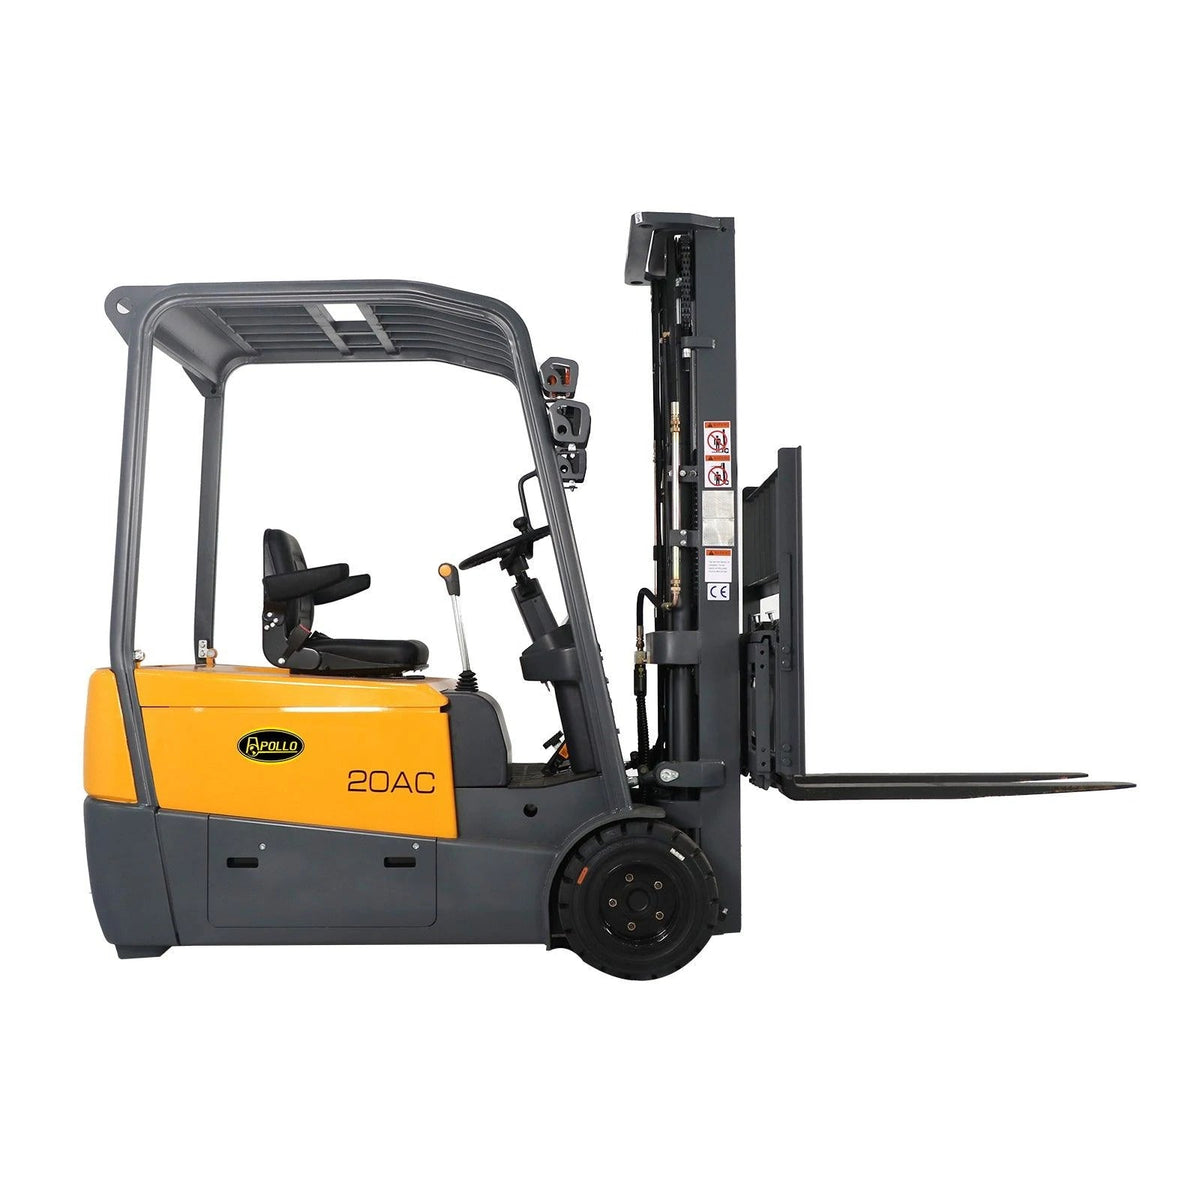 Apollolift 3 Wheel Lithium-Ion Battery Forklift 220" Lift 4400 lbs. Capacity Heat Film Optional New